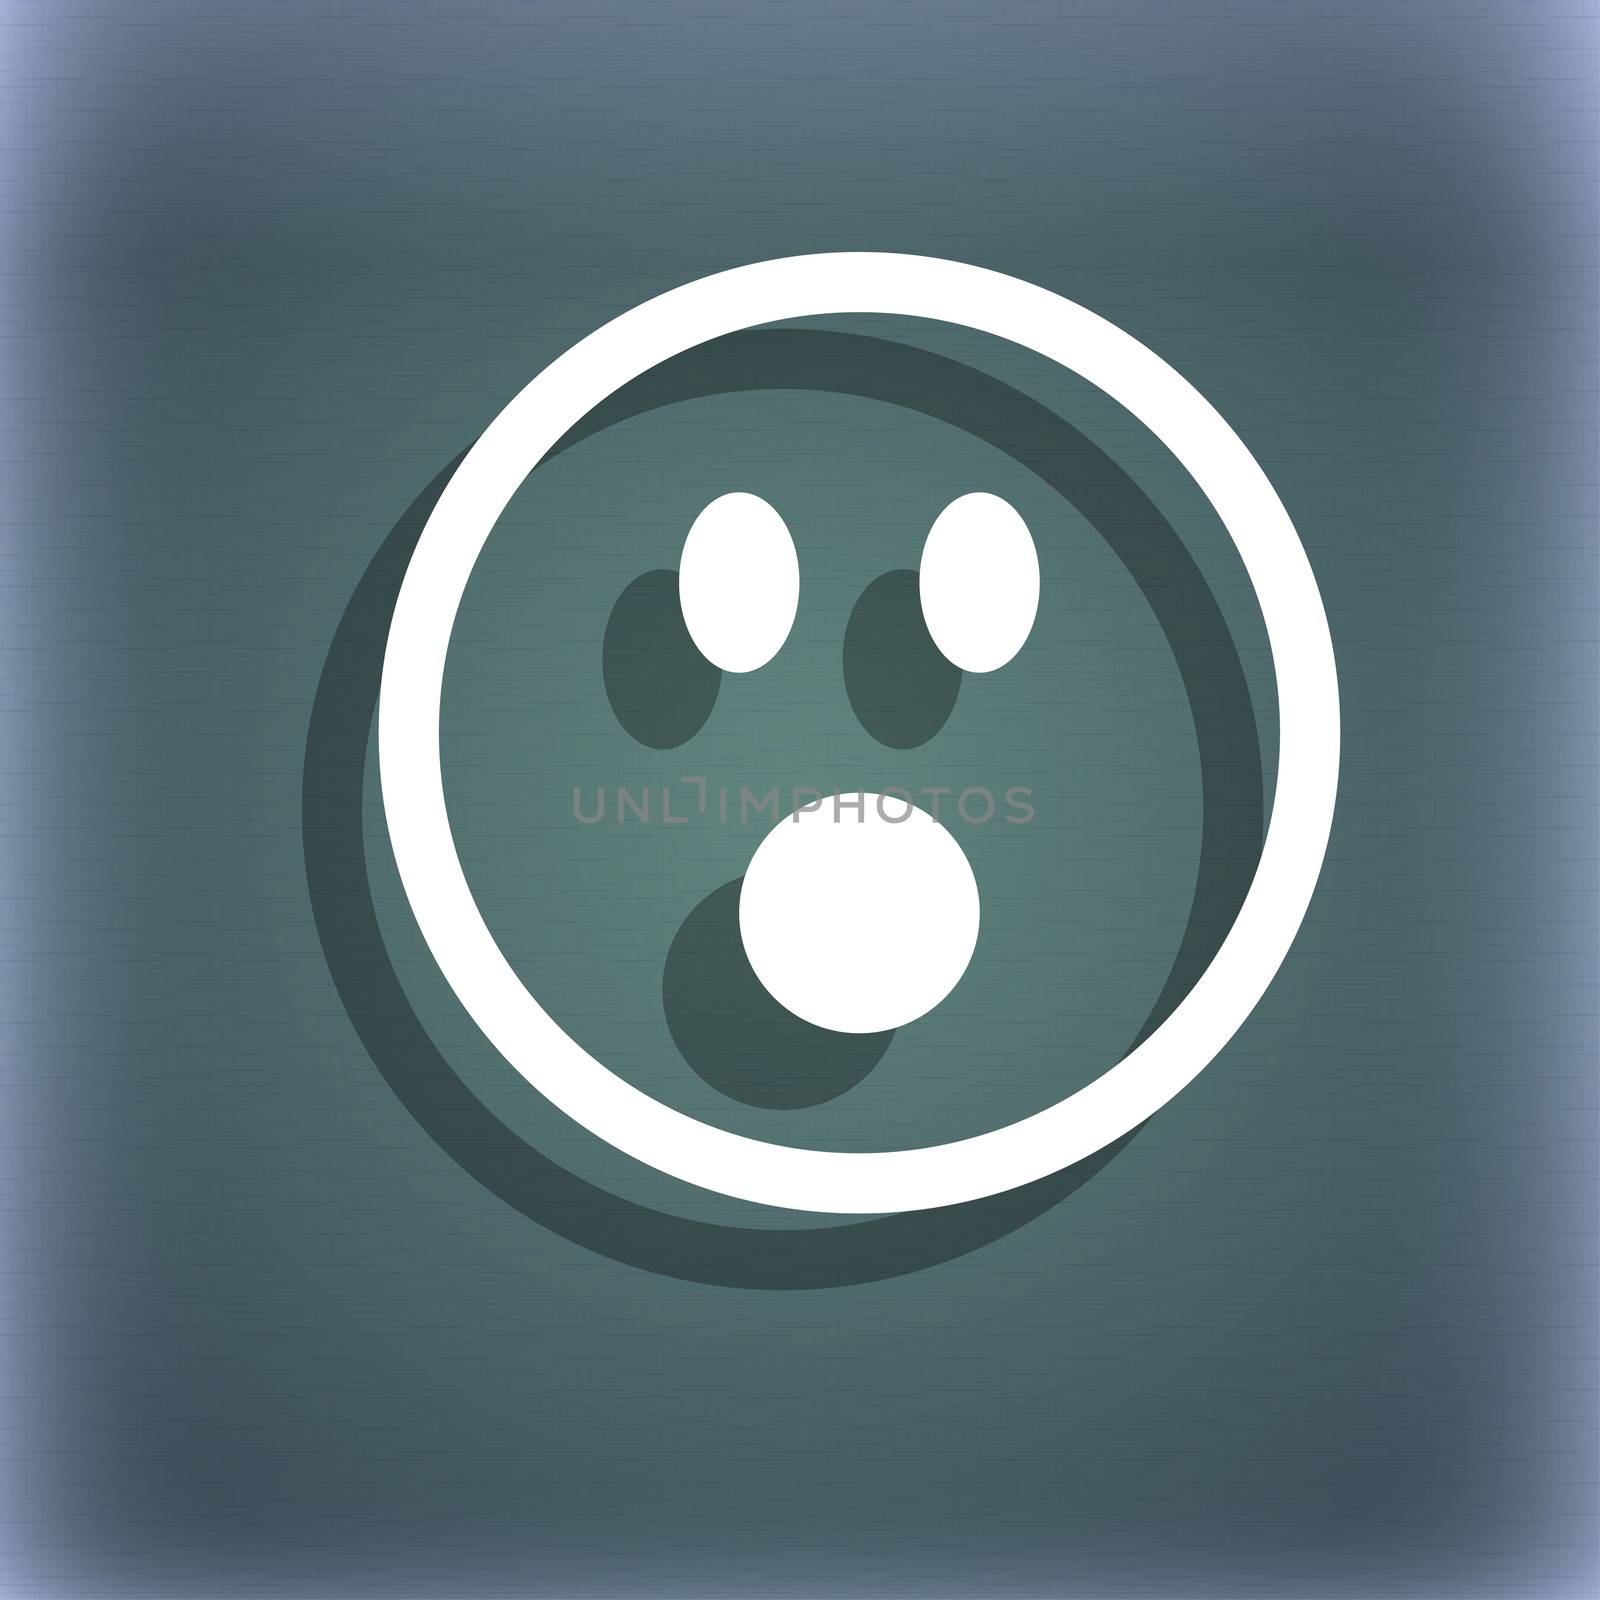 Shocked Face Smiley icon symbol on the blue-green abstract background with shadow and space for your text. illustration